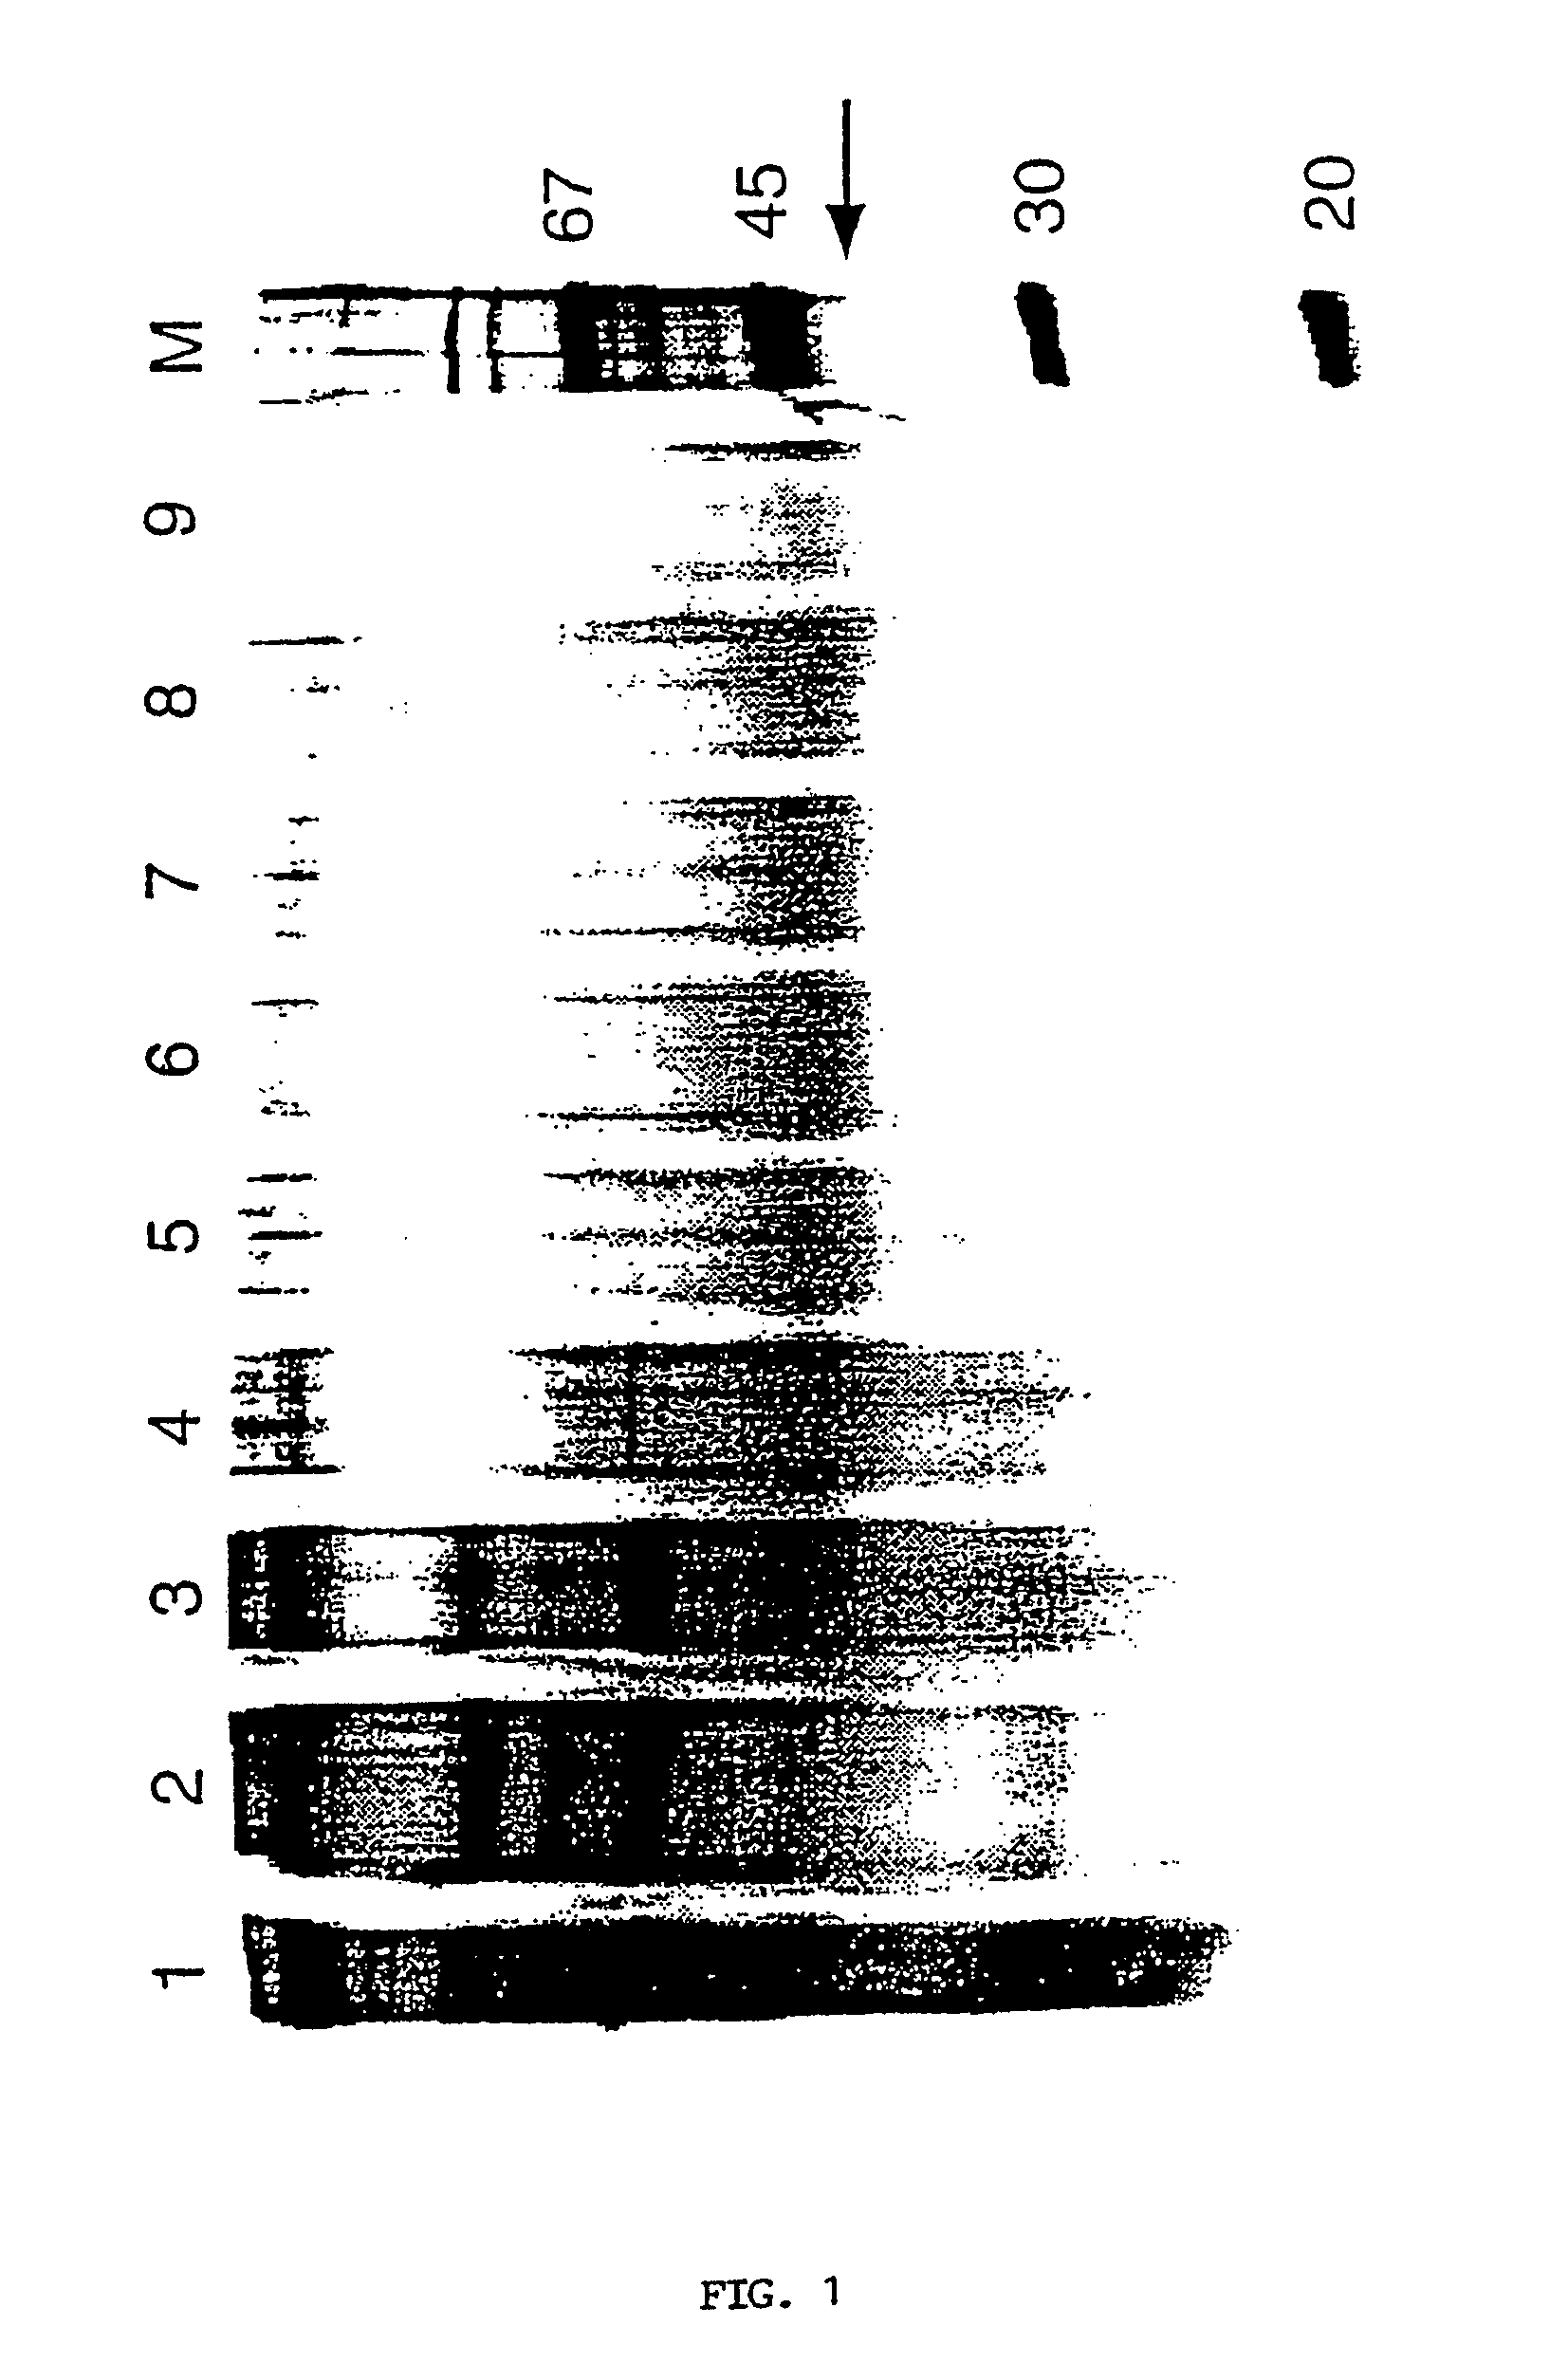 Interleukin-18 binding proteins, their preparation and use for the treatment of sepsis